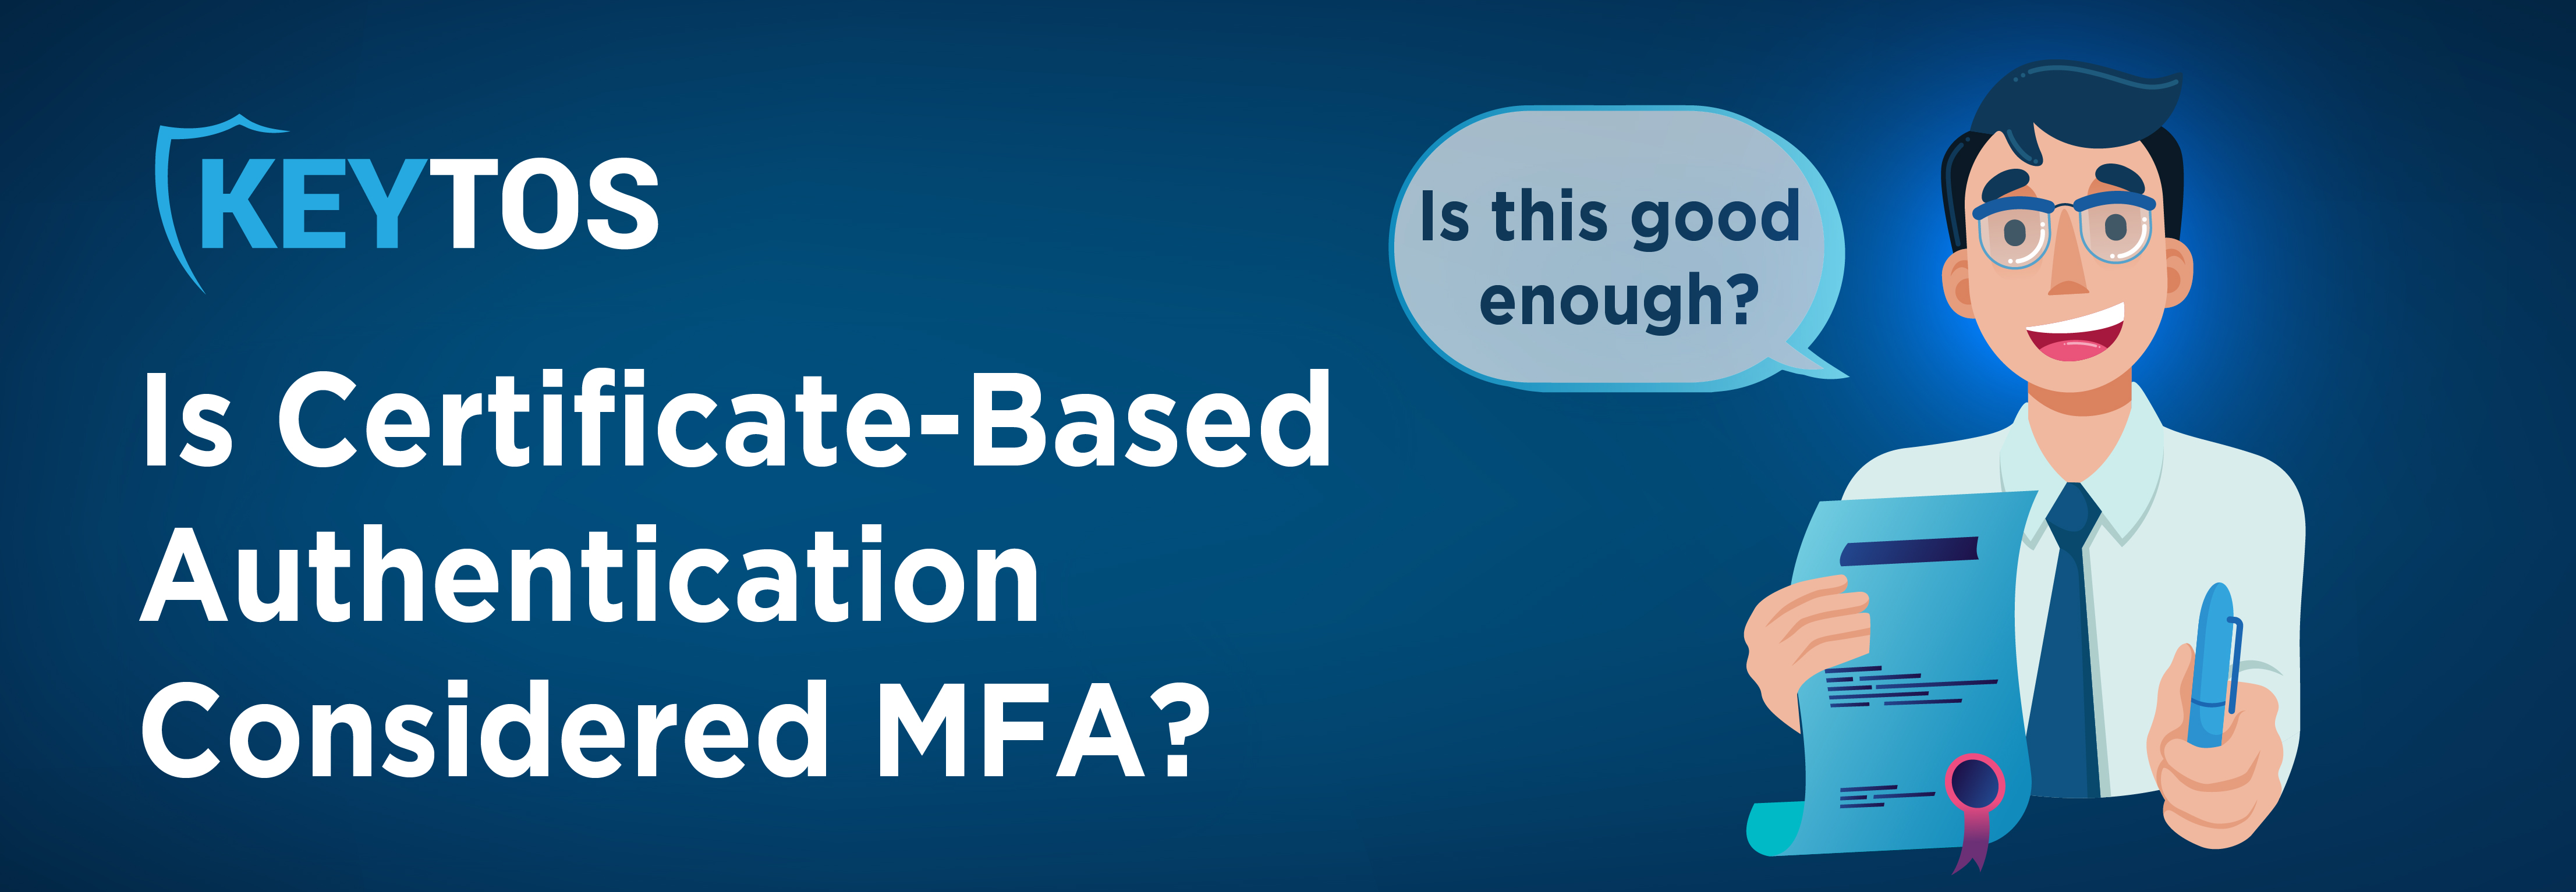 Are CBA and MFA the same thing?